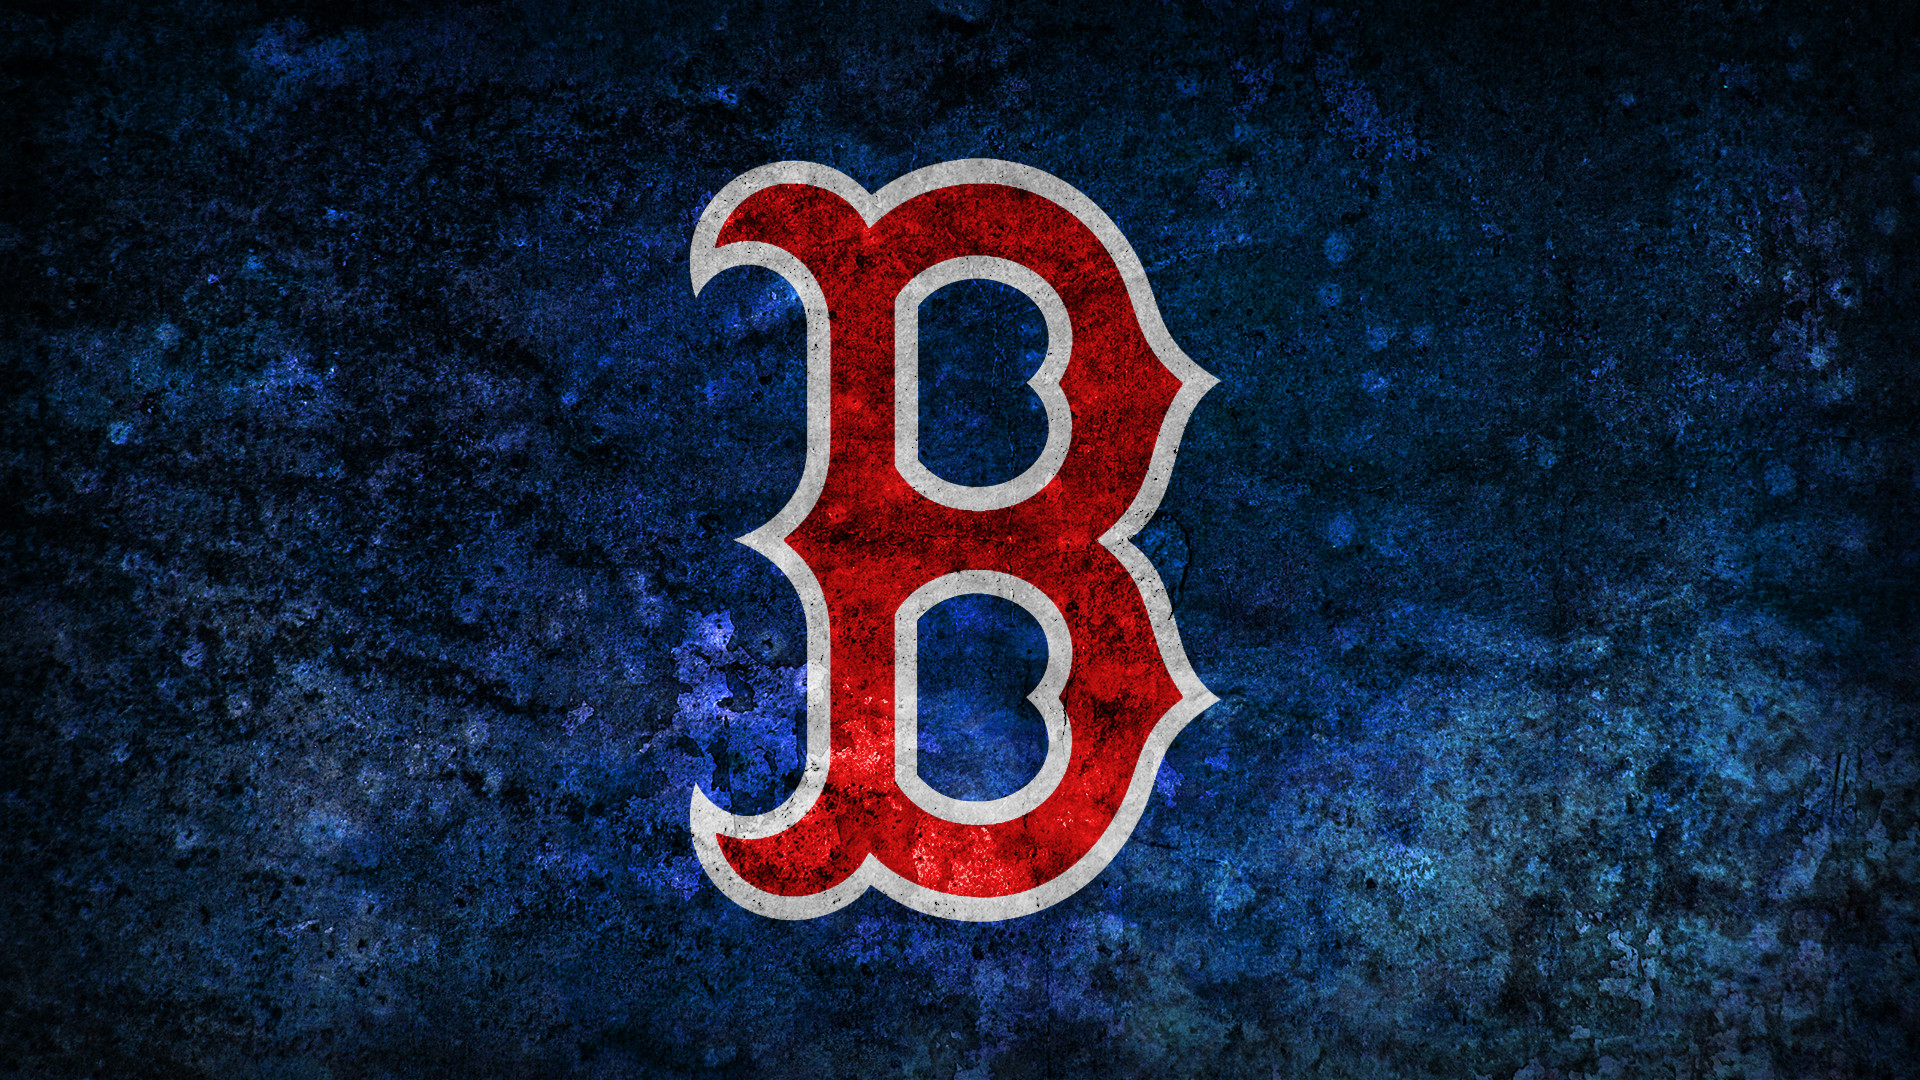 [Image] Some wallpapers I made. Naturally they are Red Sox wallpapers, but  I am willing to make them for all 30 teams if there is enough interest.